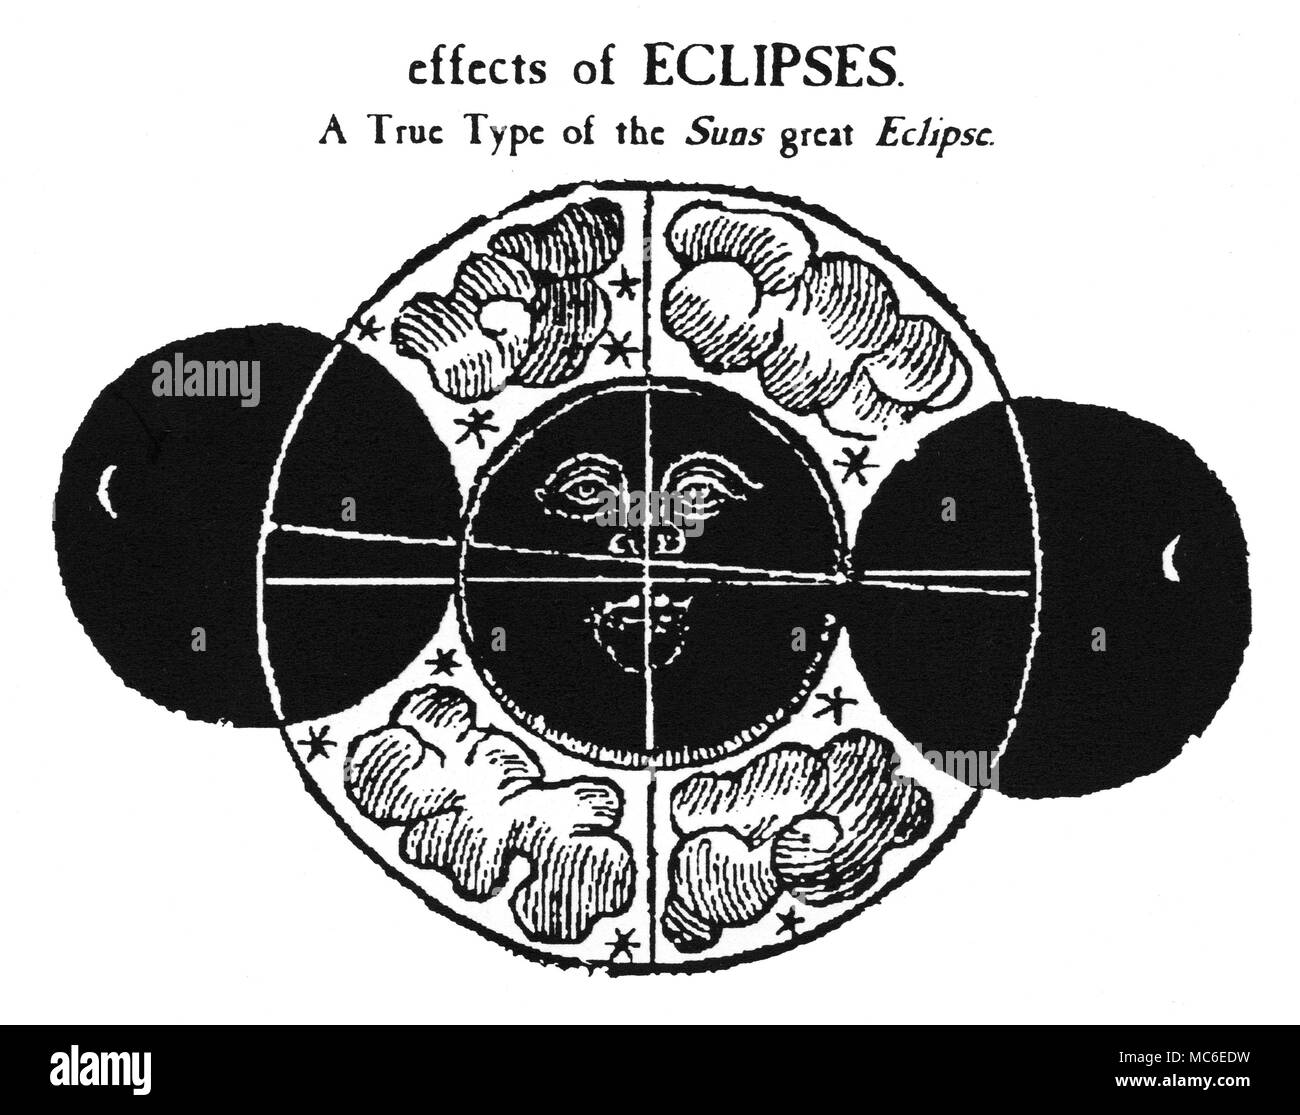 ASTROLOGY - ECLIPSES A woodcut illustrating the effect of one of the seven eclipses which occured in the 'Dark Yeare' of 1652 - three of which were visible in England. From William Lilly, Annus Tenebrosus, or the Dark Year. Or Astrolgicall Judgements upon two Lunar Eclipses and one admirable eclips of he Sun, all visible in England, 1652. Stock Photo